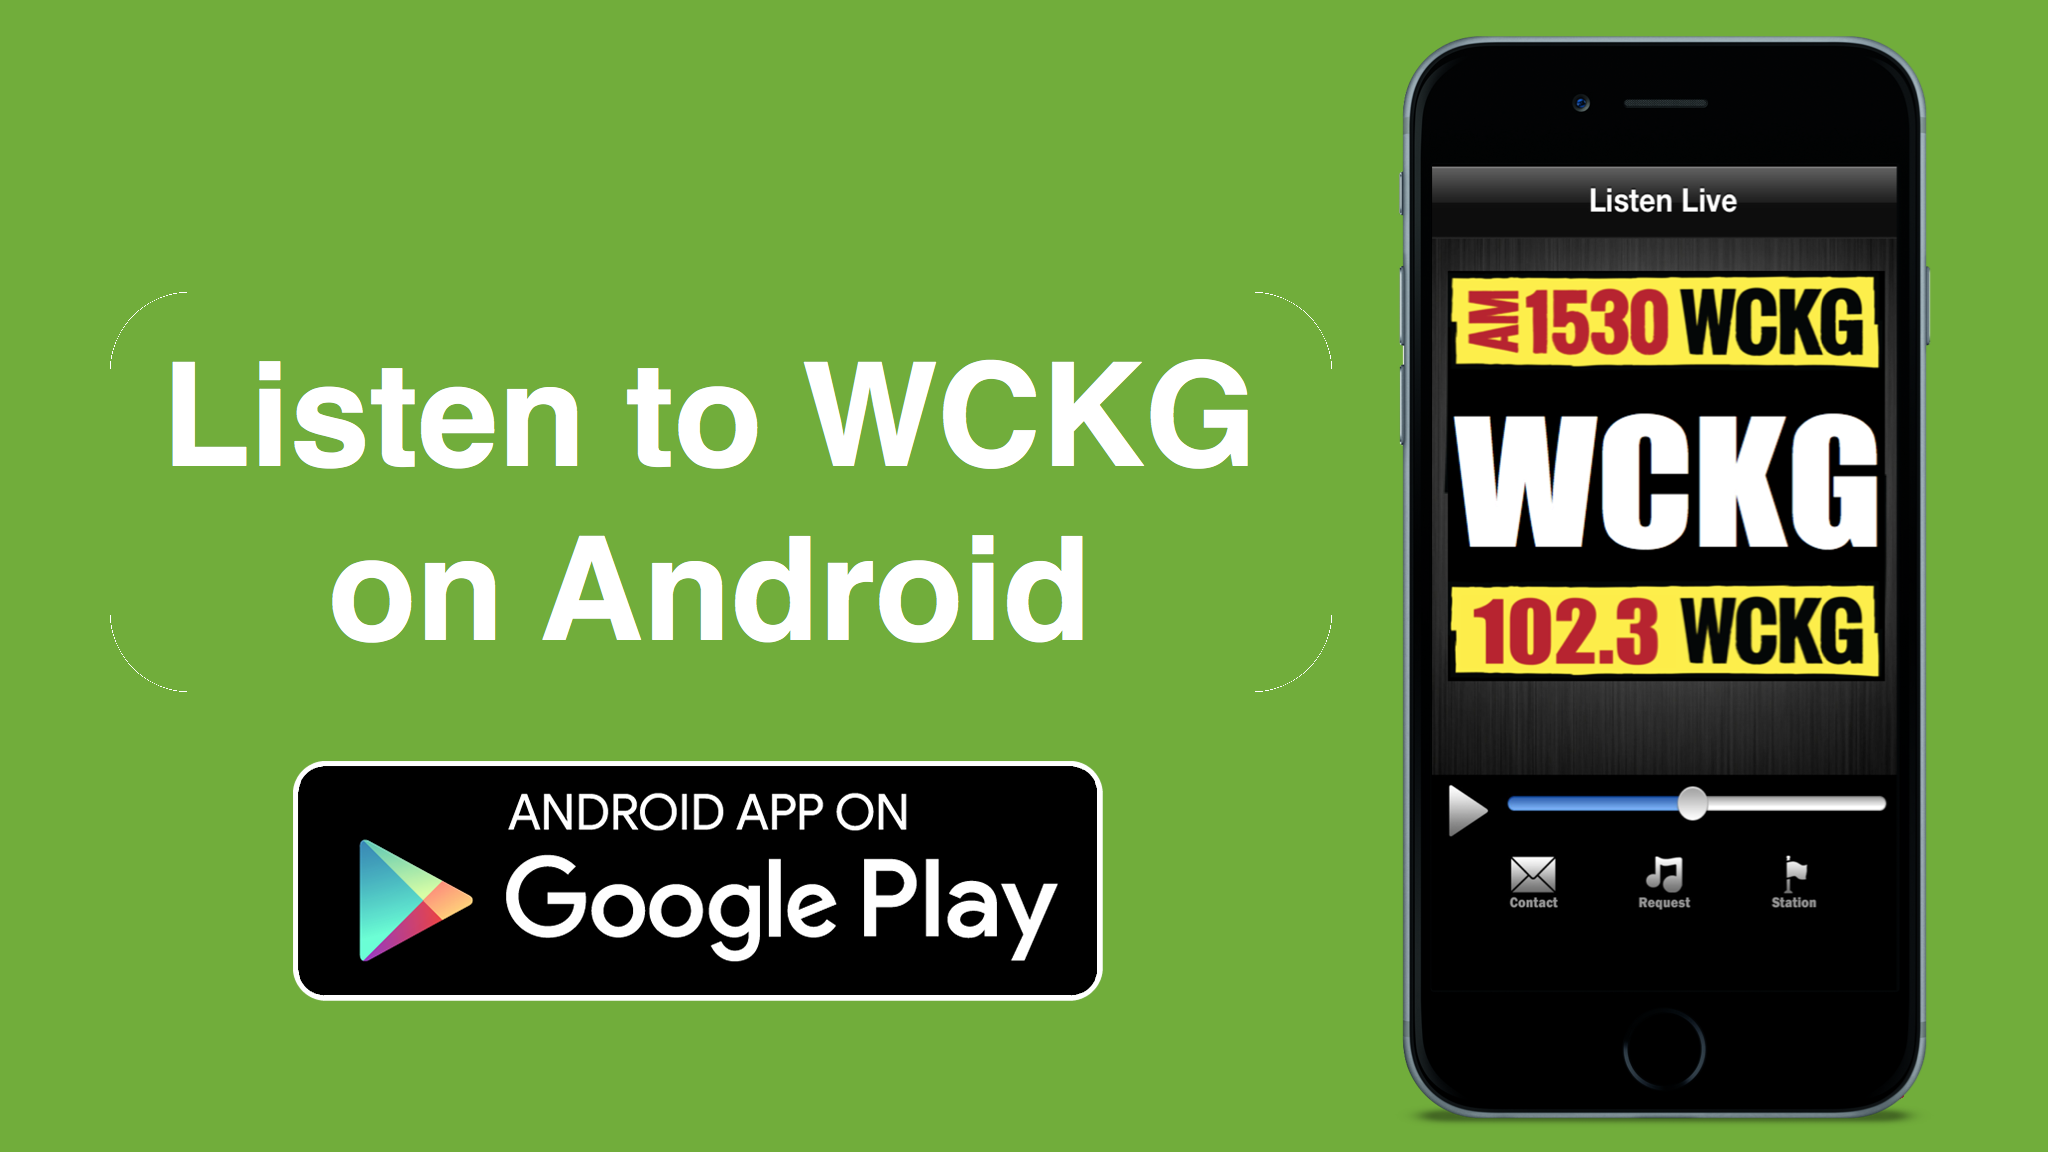 wckg-free-android-app-google-play